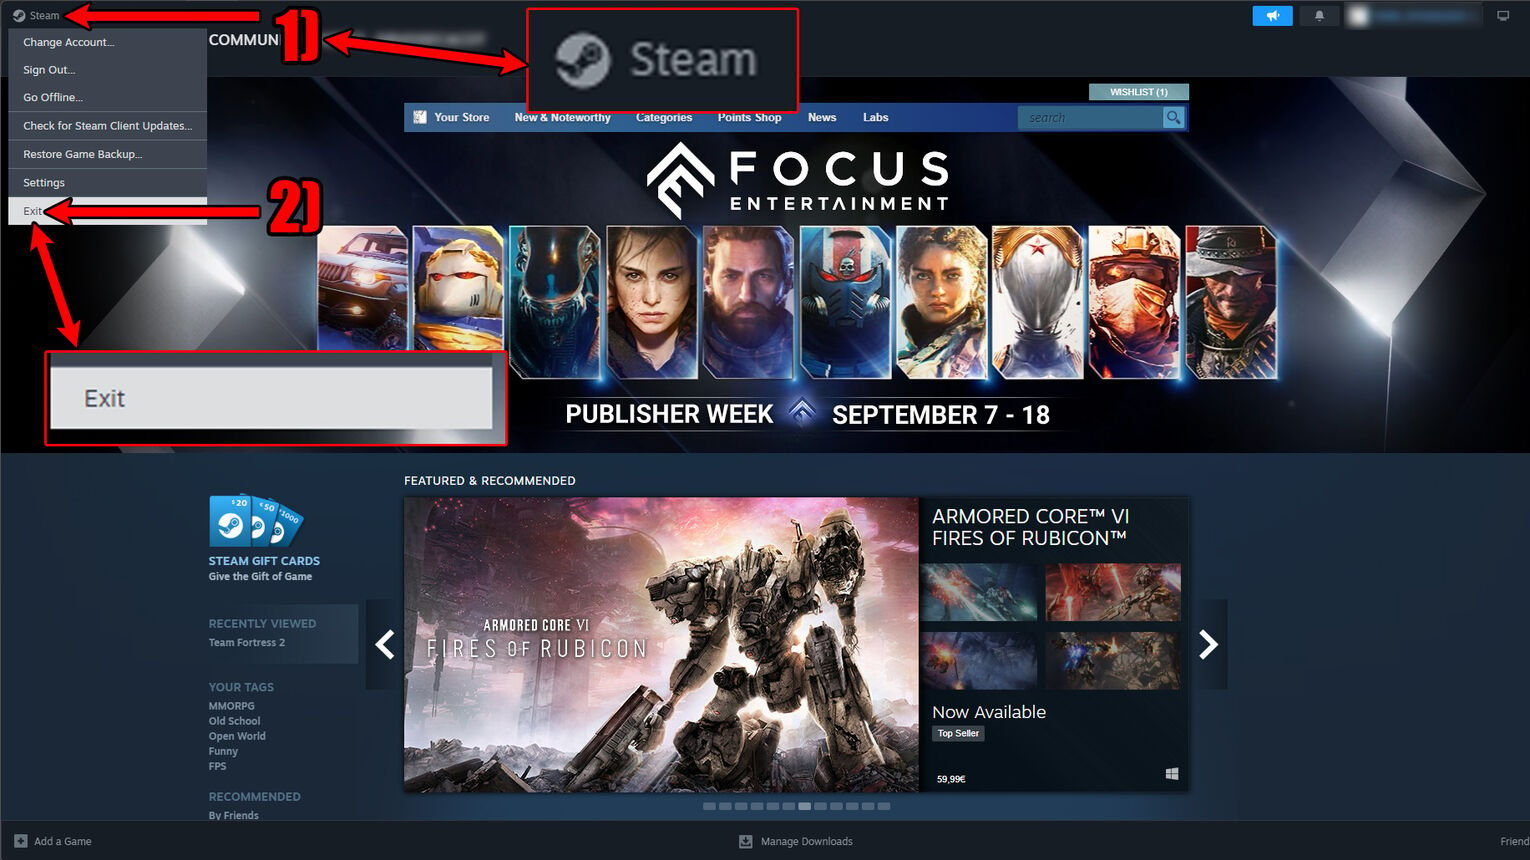 Steam Disable Notifications by Closing Client App